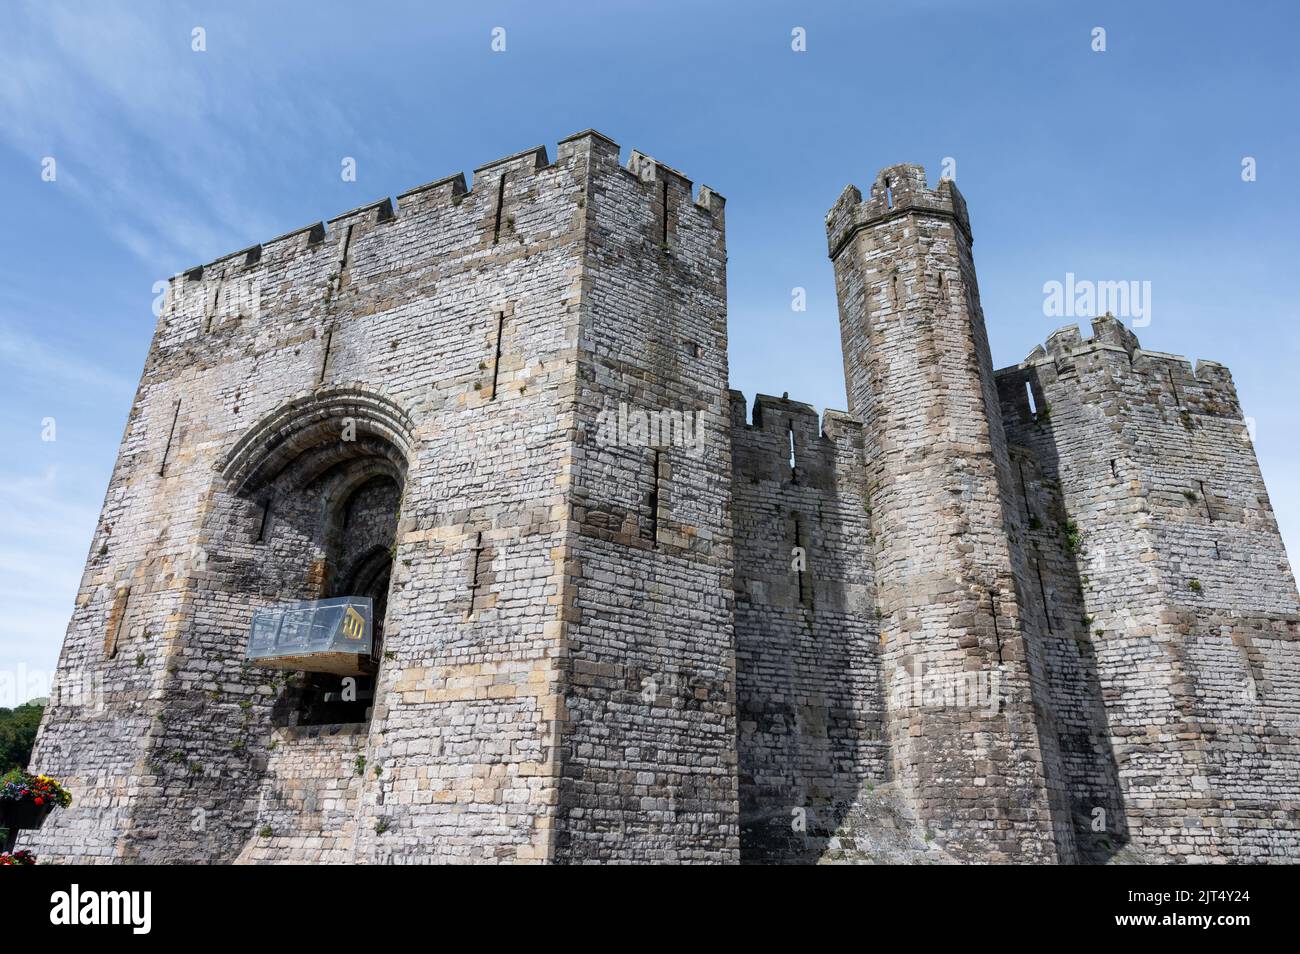 Caernarfon, UK- July 11, 2022: Queens Gate at the medieval Castle of Caernarfon in North Wales Stock Photo